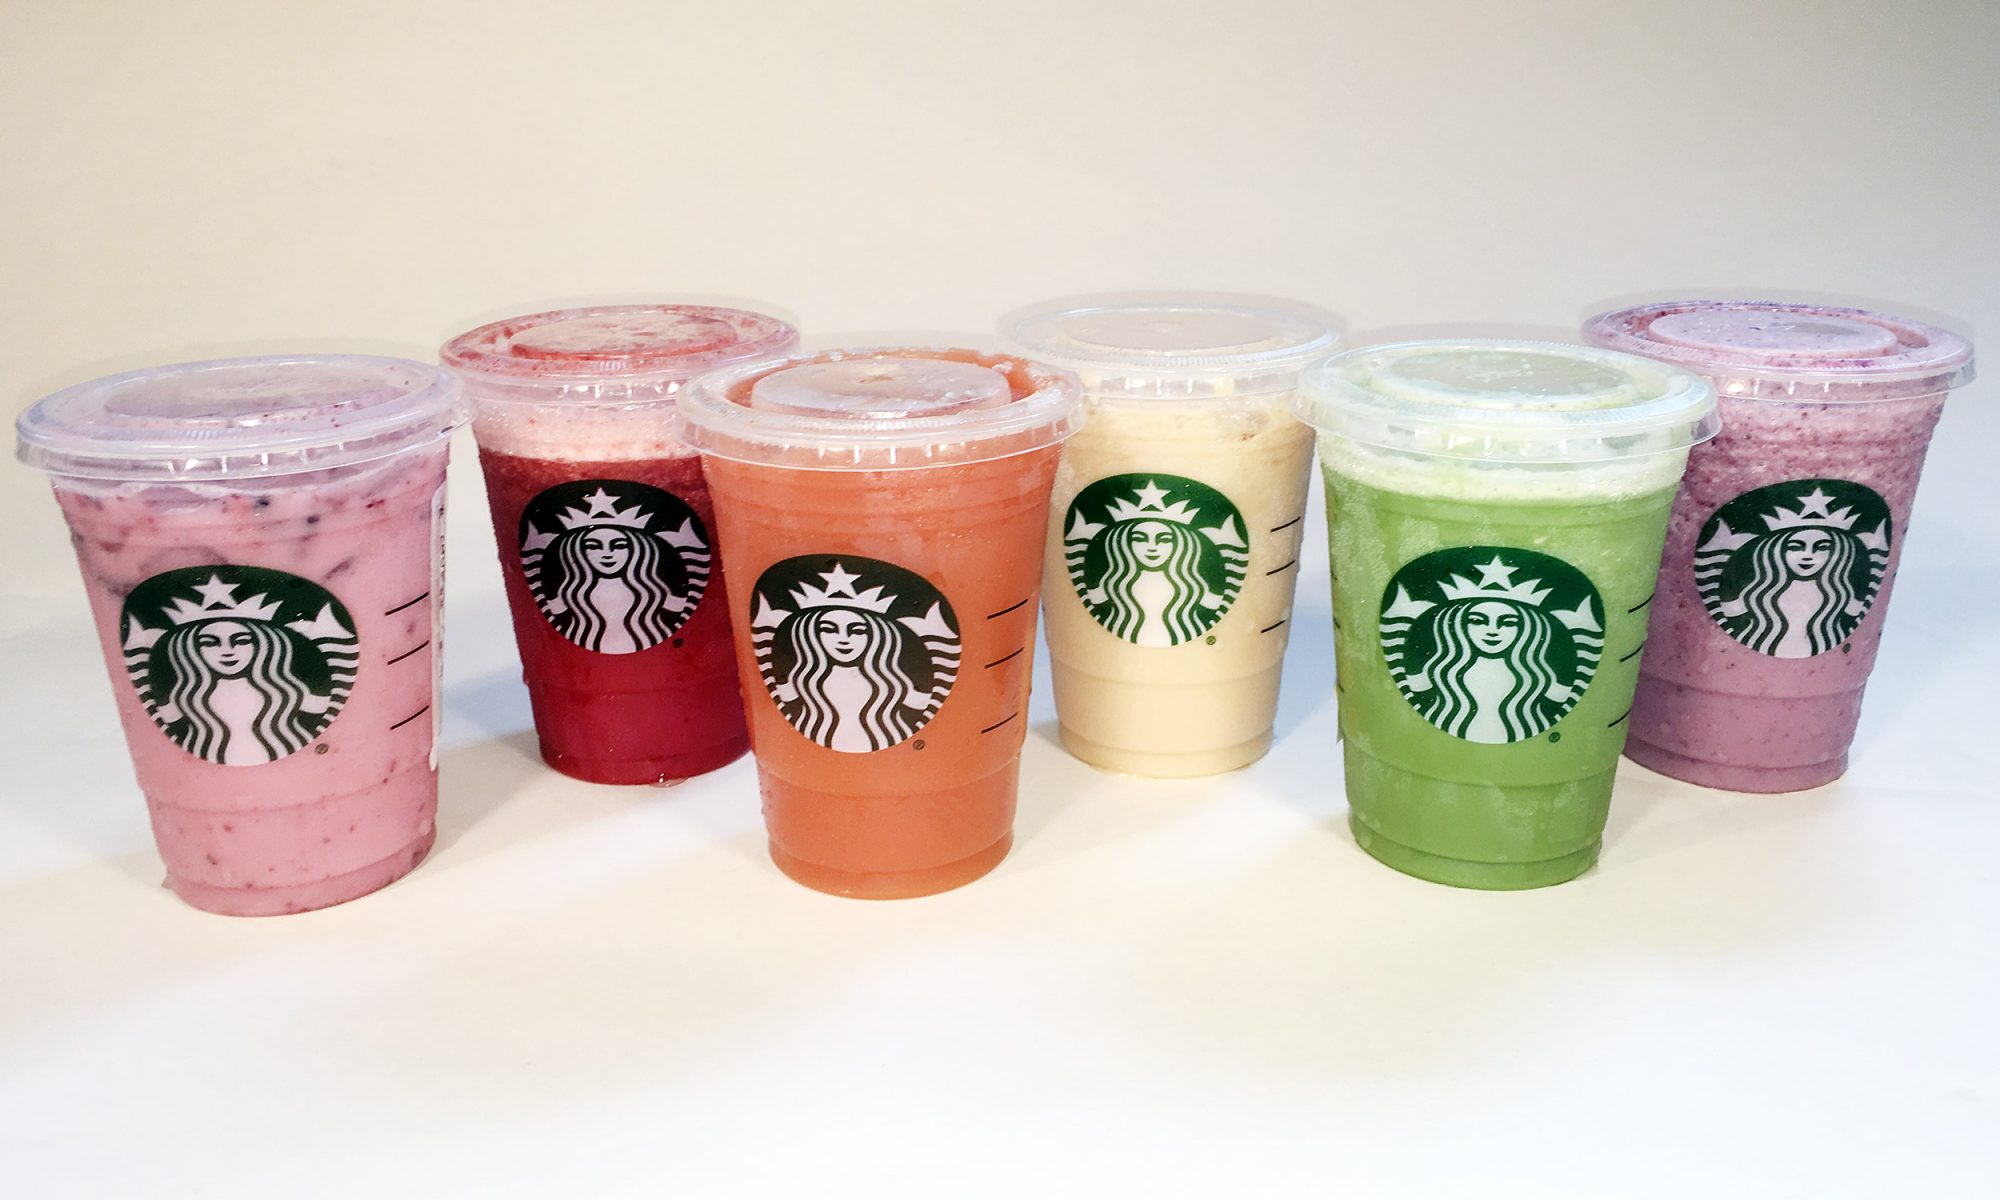 EC: The Starbucks Pink Drink Is No Match for Our Rainbow